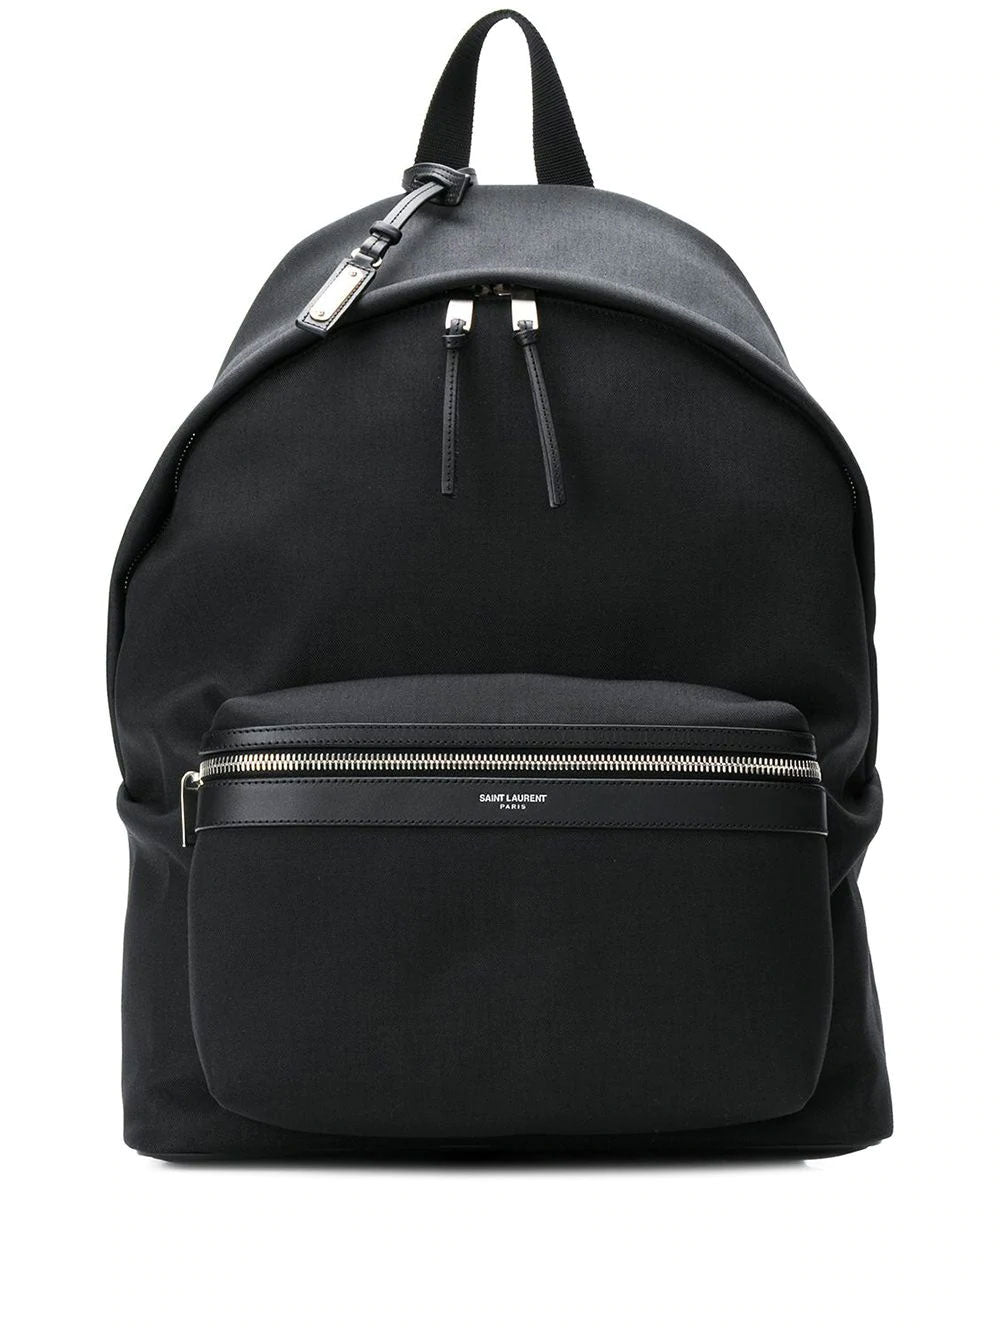 Backpack with zipper